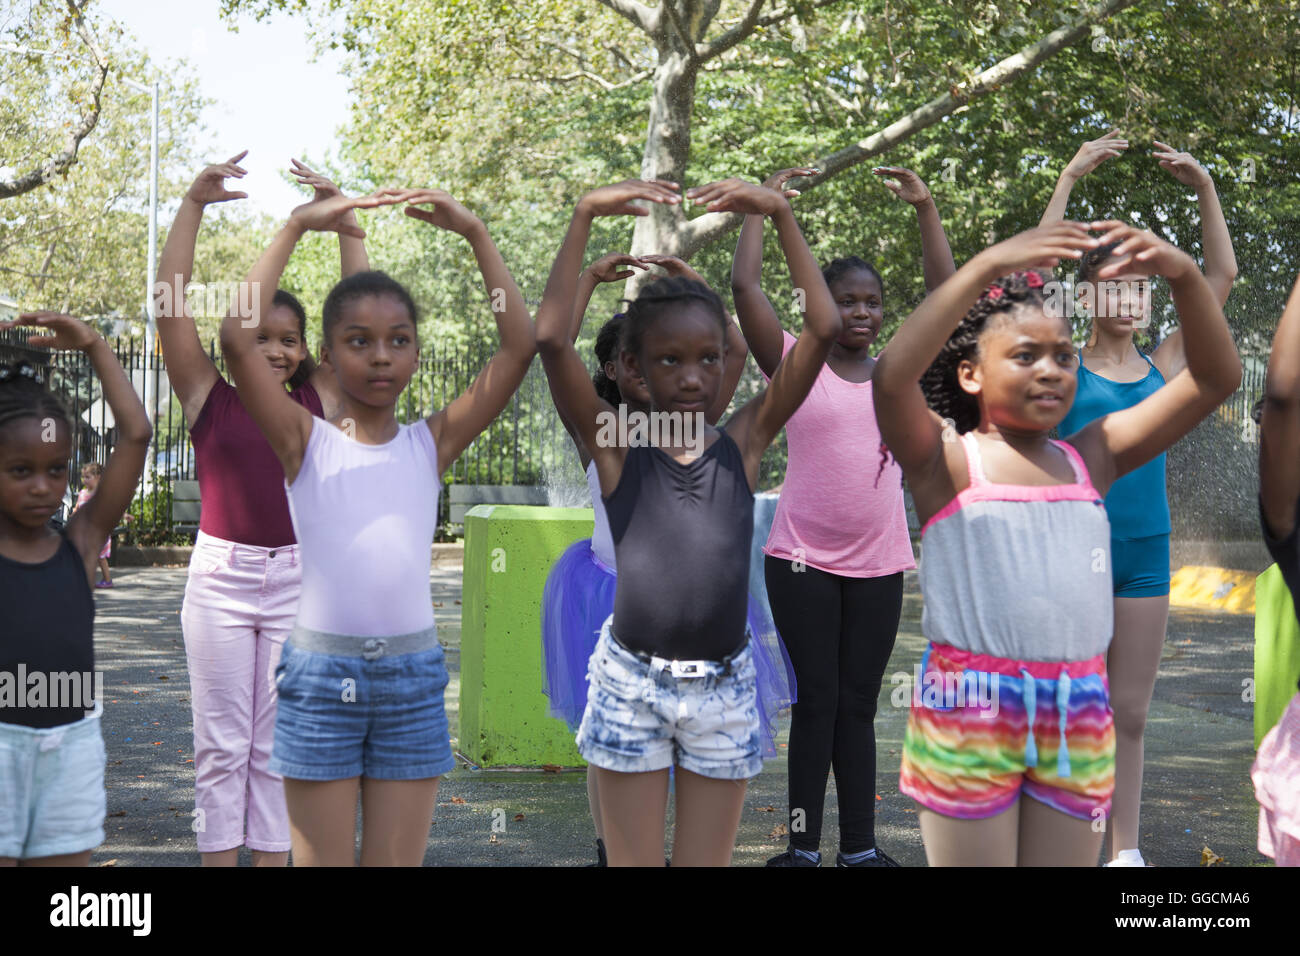 Young dancers from Cynthia King Dance perform at a local neighborhood playground in Brooklyn, New York. Stock Photo